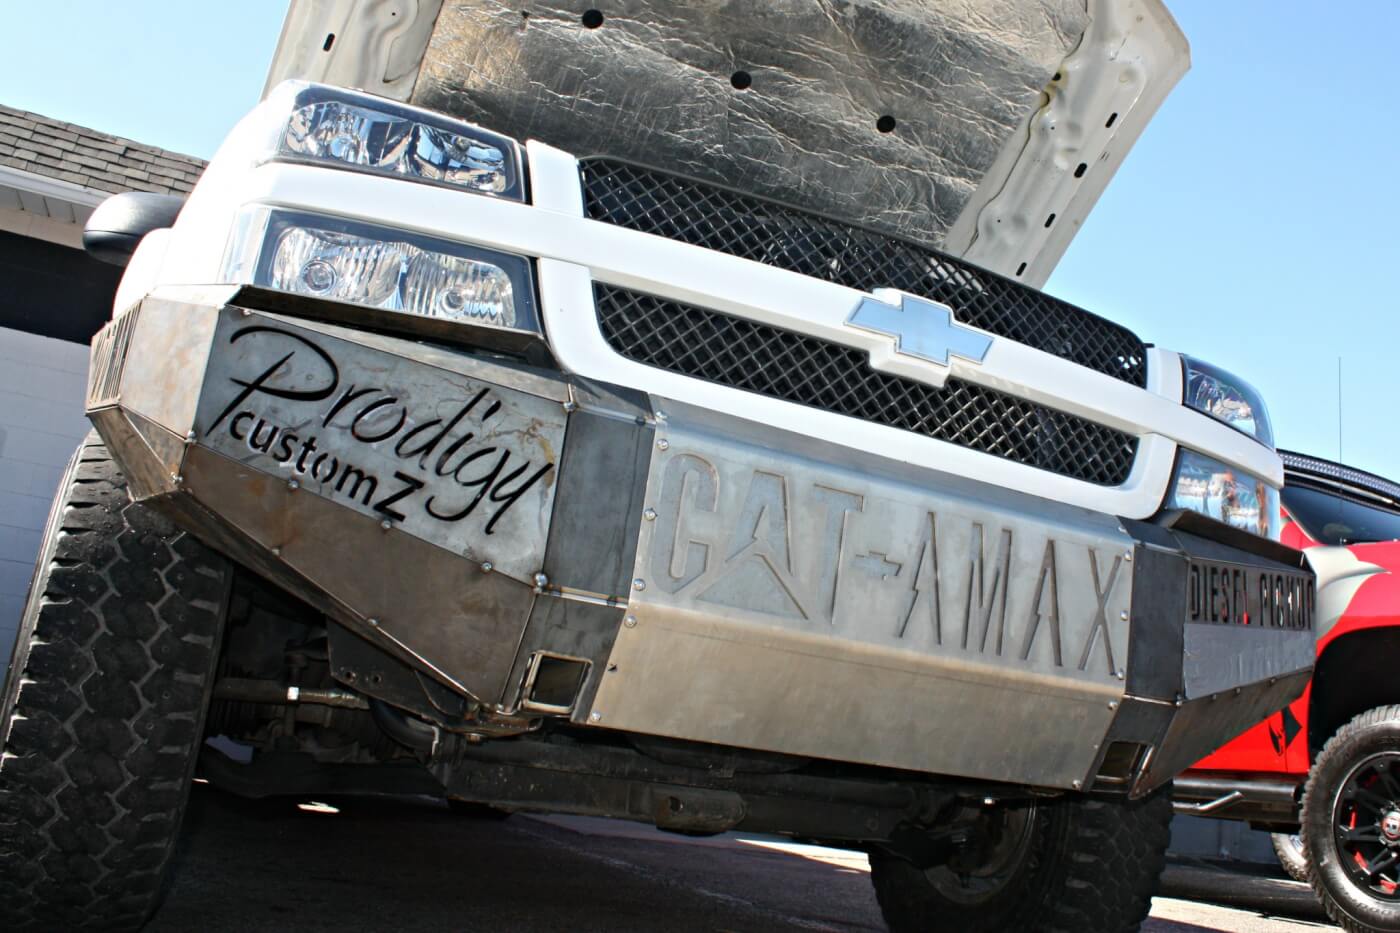 Dan Madden had an unfortunate run-in with a cement barrier in his ‘Cat-a-Max’ Duramax last season at a Diesel Motorsports’ dirt drag event when he couldn’t quite get the truck stopped in time. But it appears that it’s back with vengeance and ready for more. 901 hp was enough for a fourth place finish in the compound turbo class.